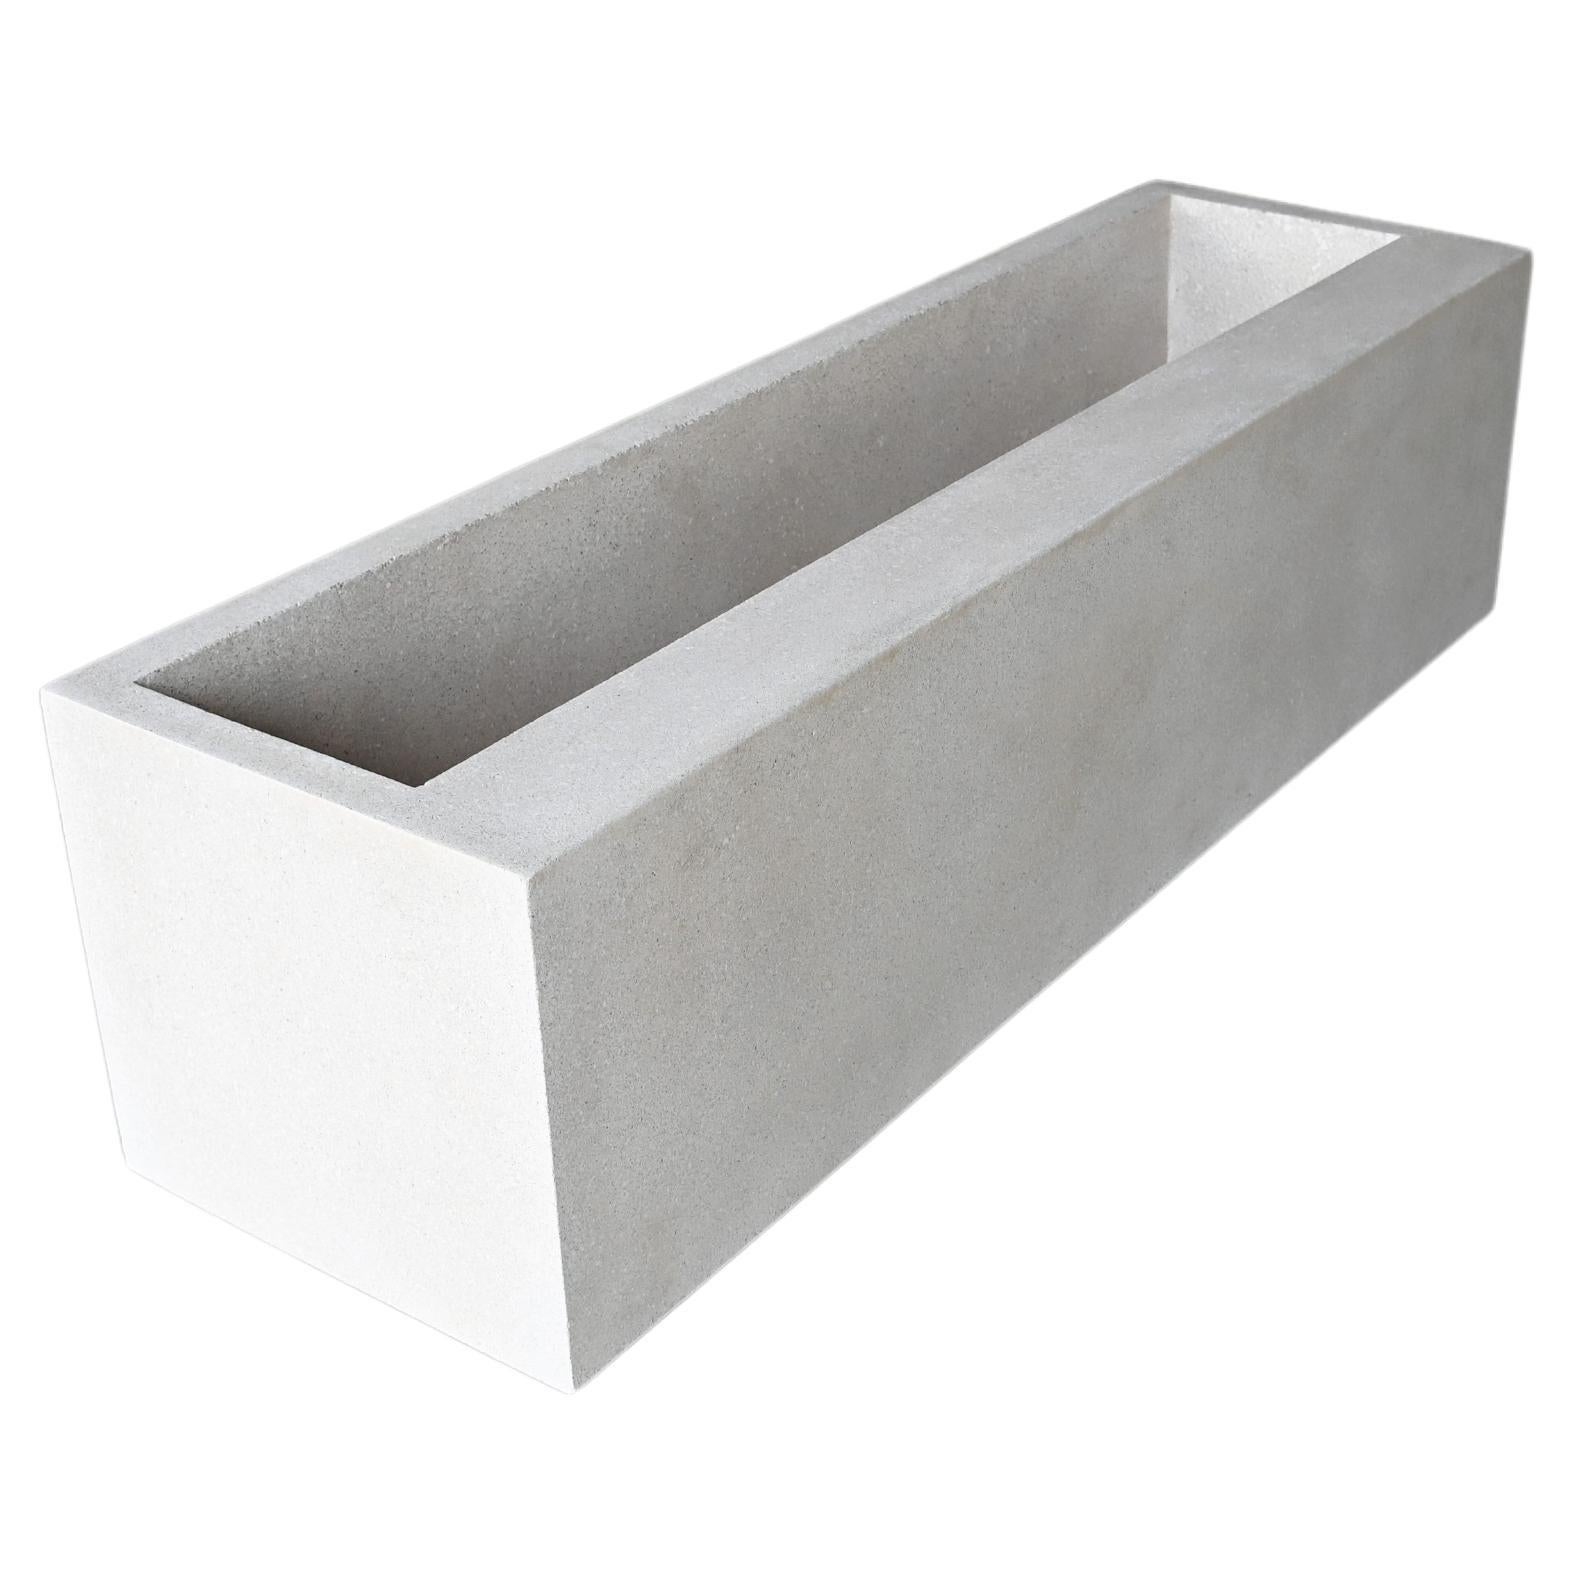 Cast Resin 'Terrace' Planter, Natural Stone Finish by Zachary A. Design For Sale